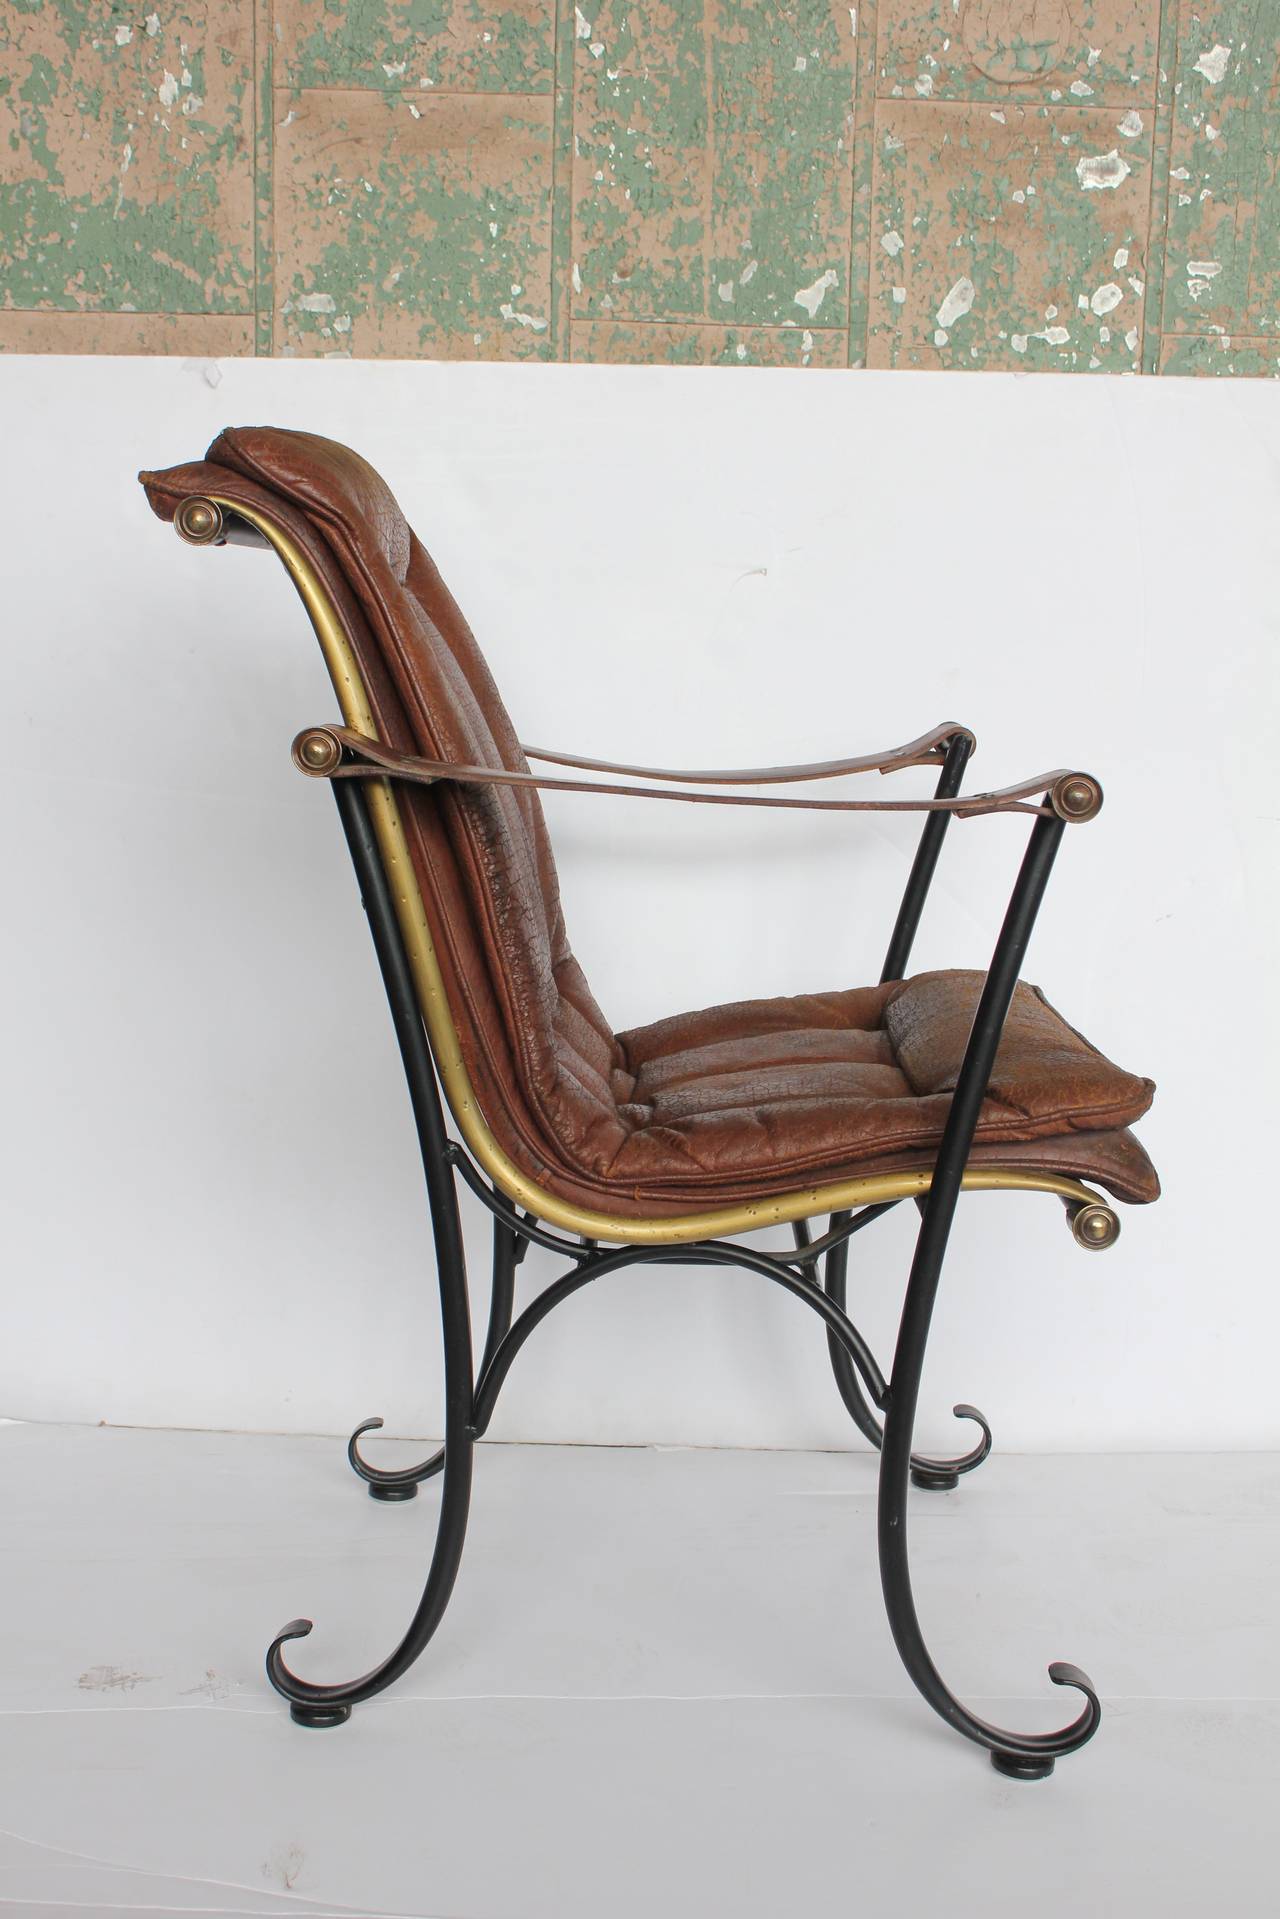 Rare 1940s leather and iron armchair by Lee Woodard. Original leather upholstery.